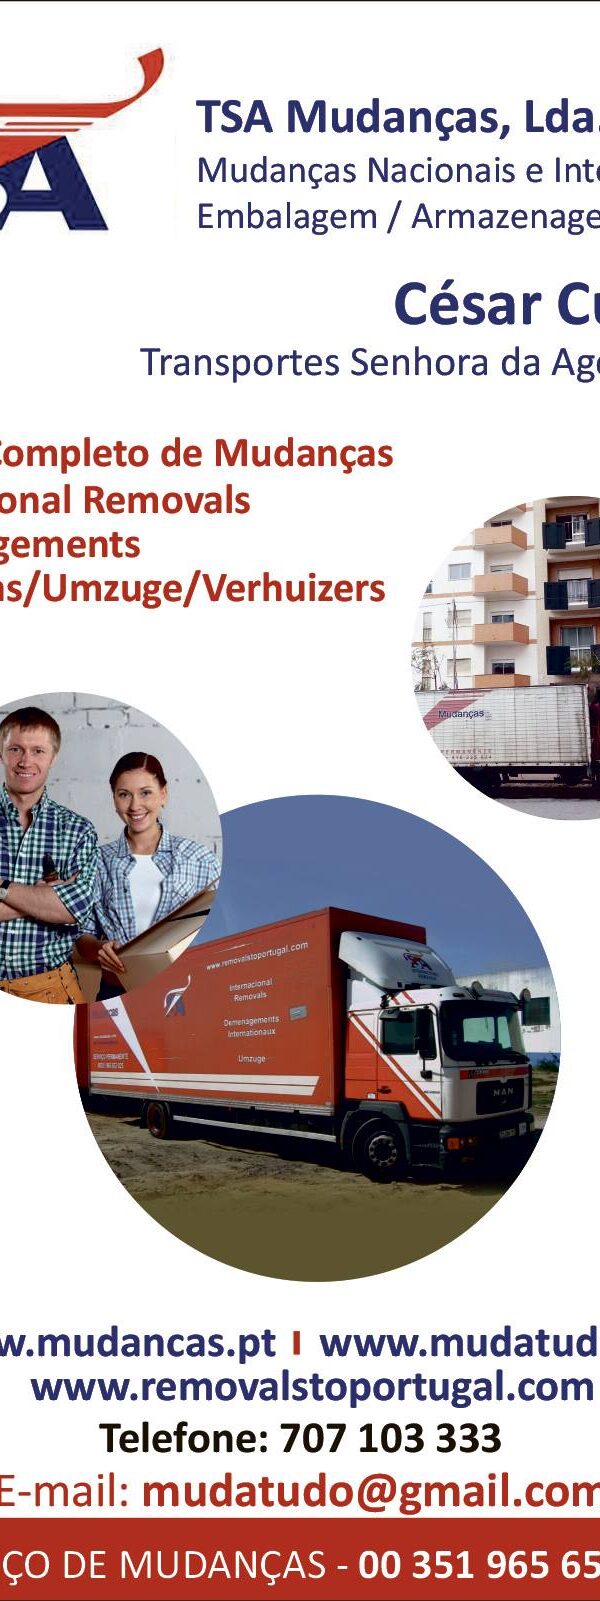 Clients, Transports, Removals, removals, International removals, removals, Social networks, reviews, clients, Moving house, moving transports